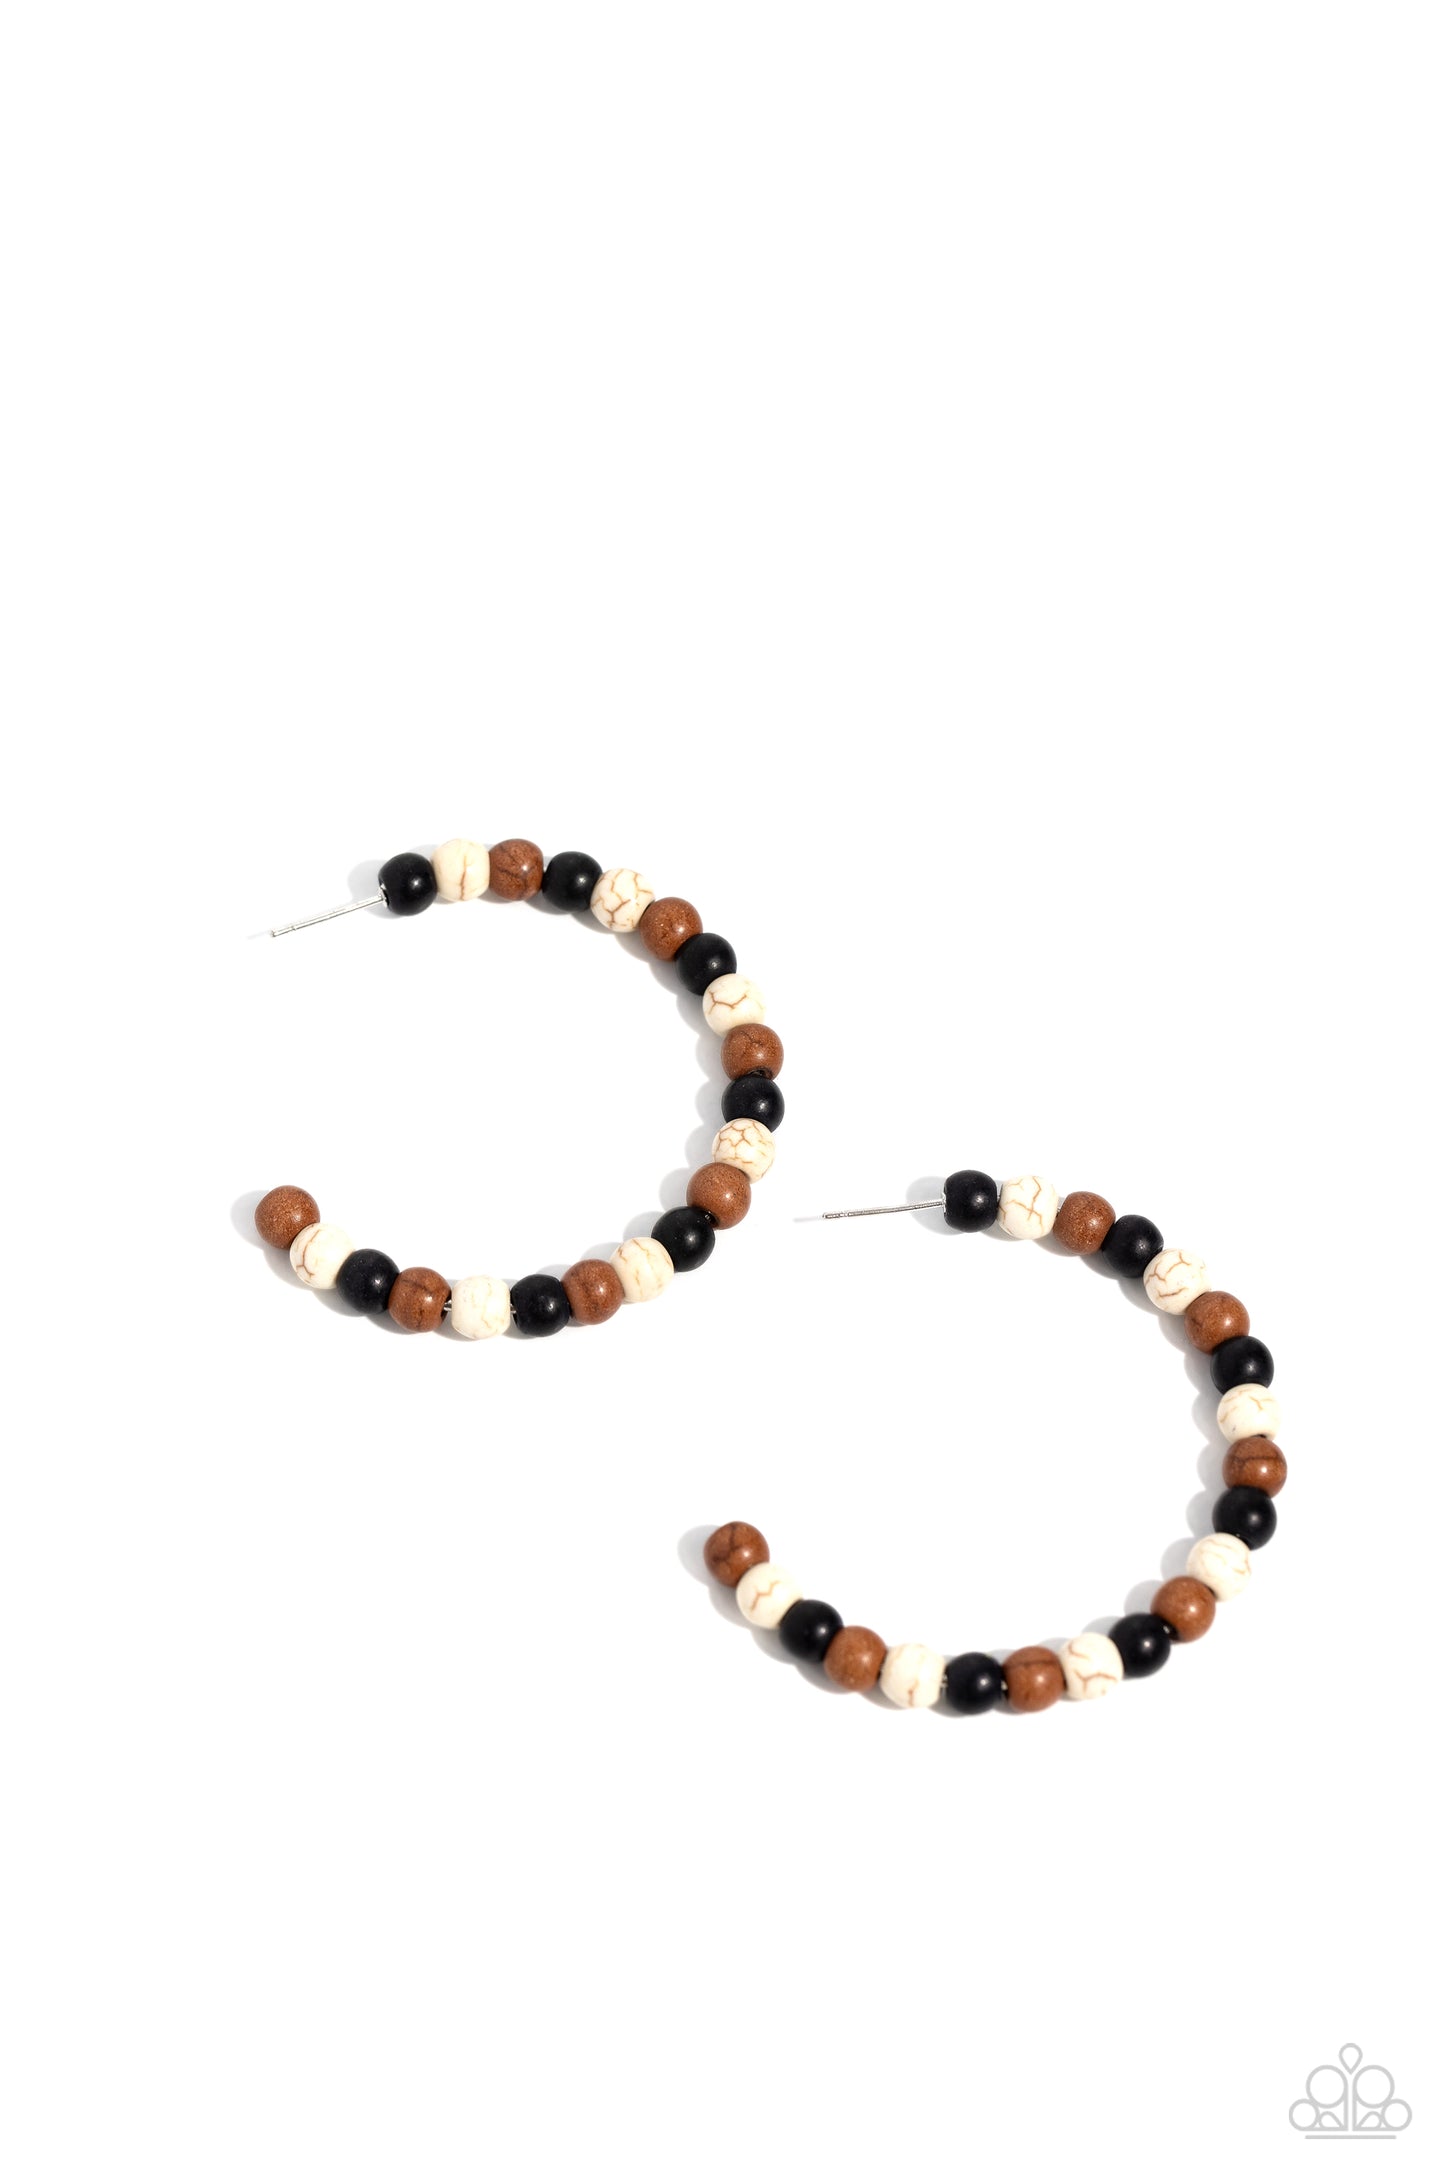 Paparazzi Accessories - Rural Retrograde - Multi Earrings earthy black, white, and Adobe stone beads are threaded along a dainty wire hoop, resulting in an earthy flair. Earring attaches to a standard post fitting. Hoop measures approximately 2" in diameter.  Sold as one pair of hoop earrings.